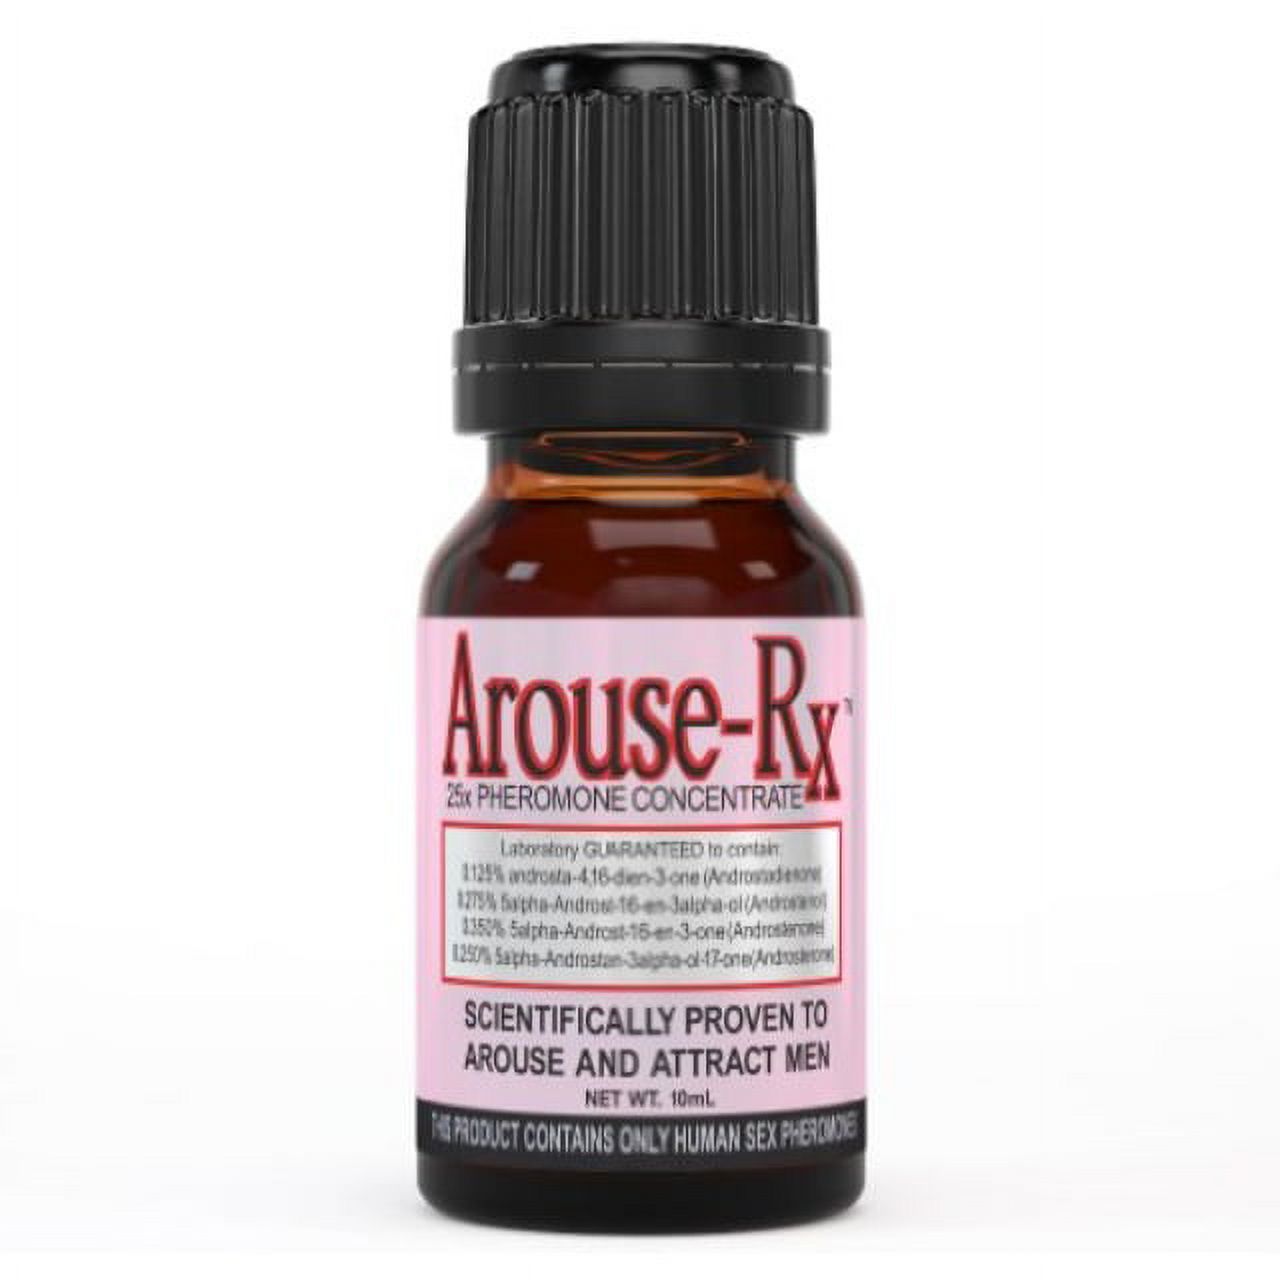 Arouse-Rx Sex Pheromones For Women: Unscented Perfume Additive to Attract Men - 10mL - image 1 of 1